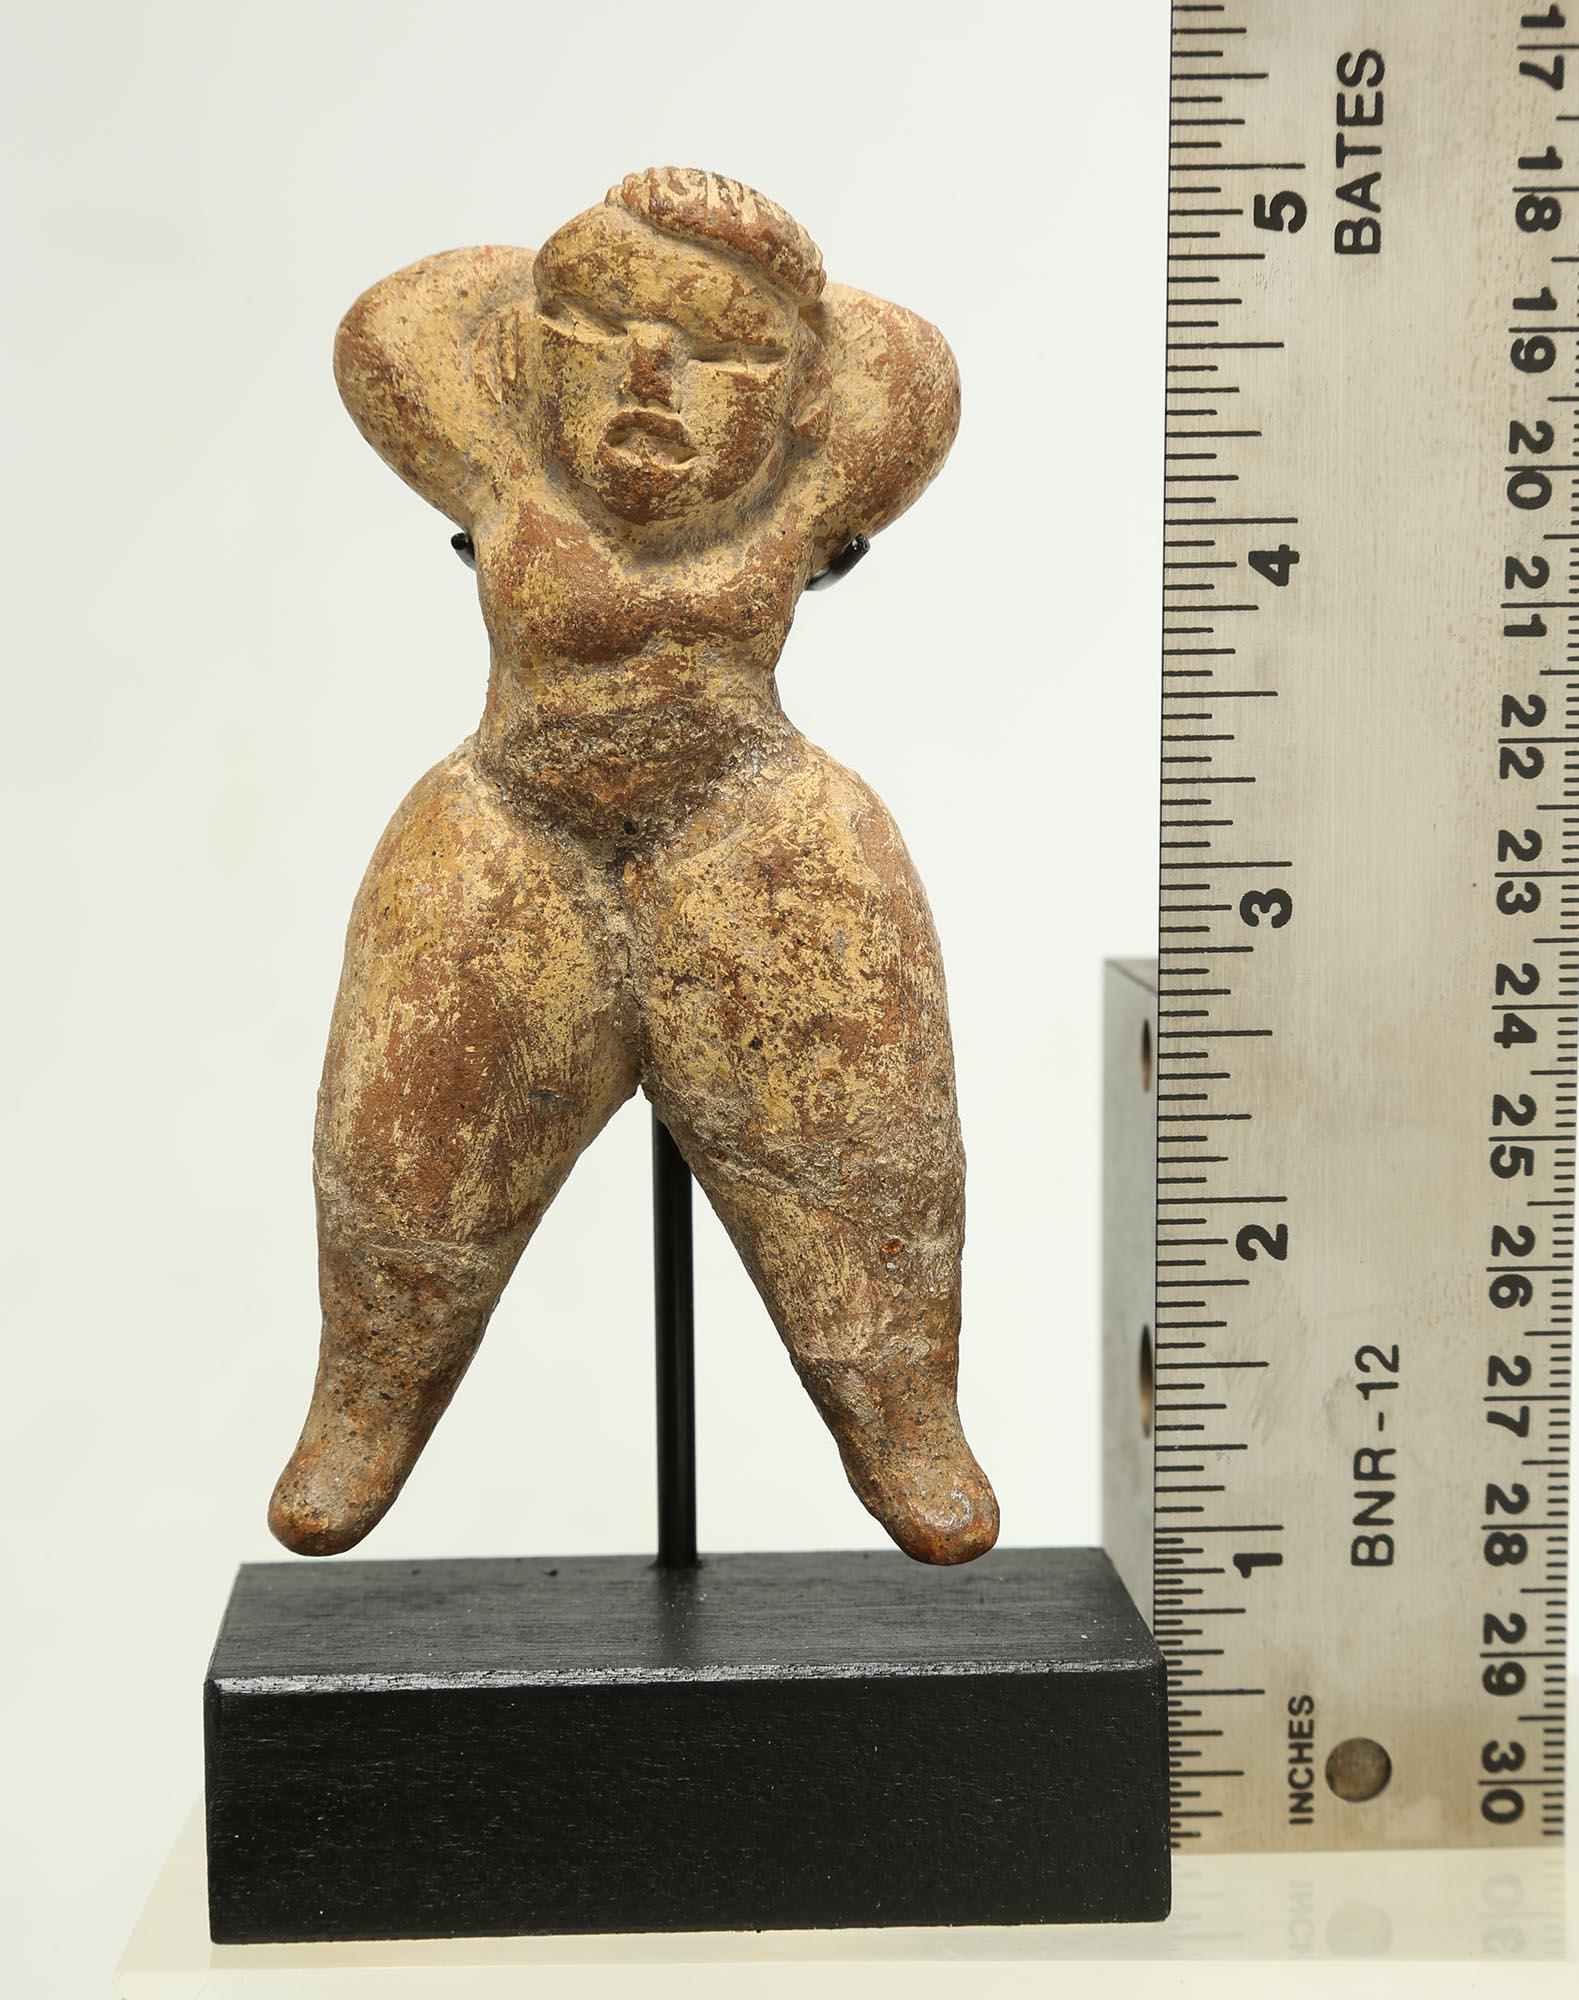 Hand-Crafted Miniature Olmec Female Figure with Hands on Head, Pre-Columbian Mexico